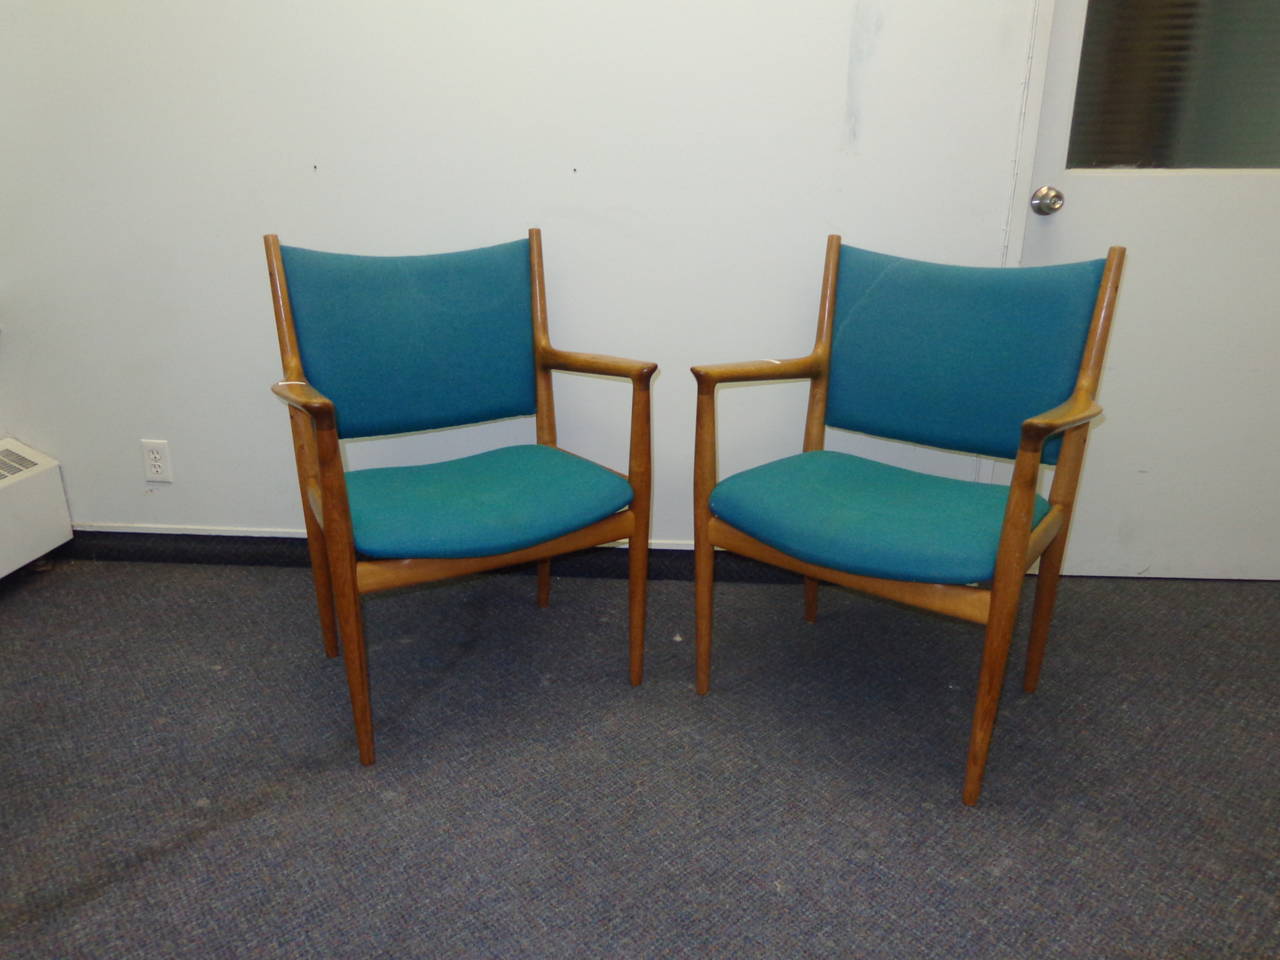 A pair of Hans Wegner FH-513 armchairs in oak with original teal upholstery.